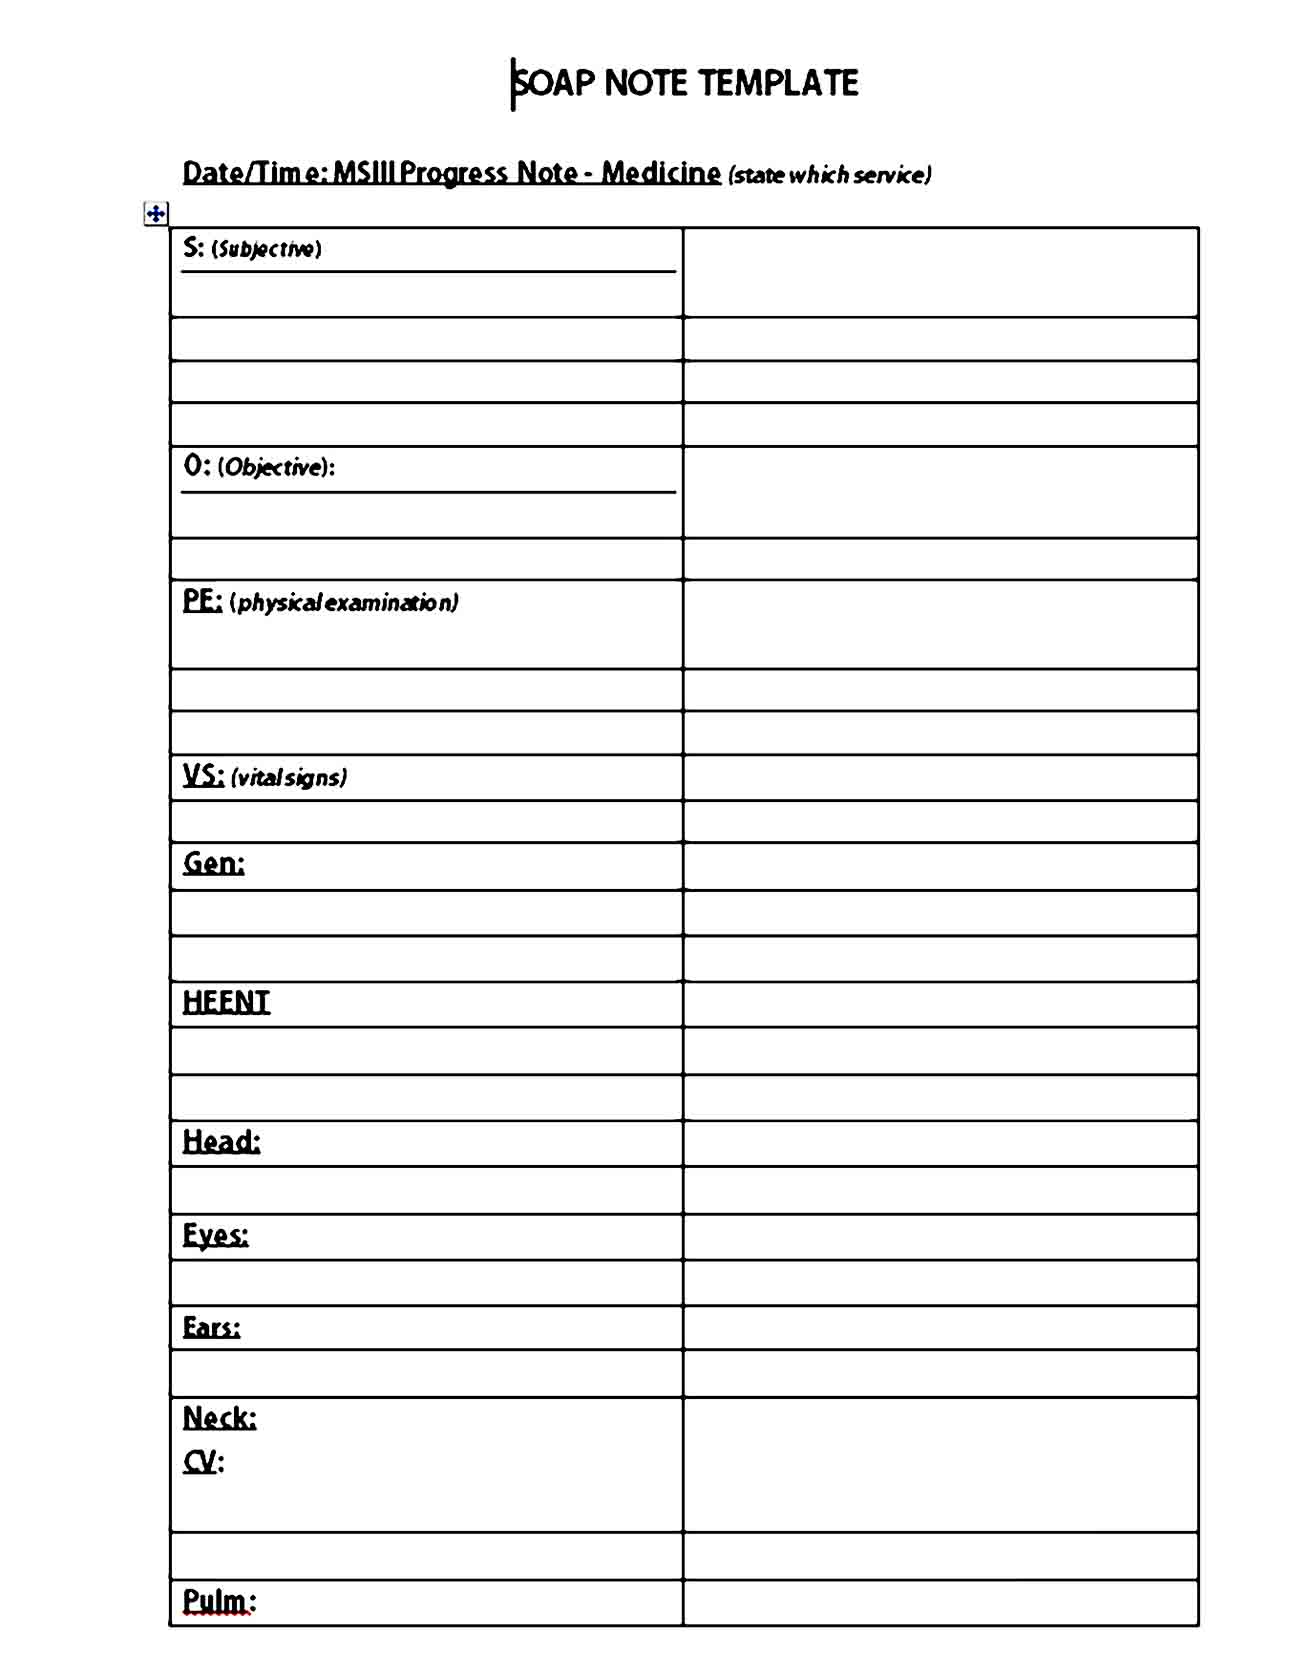 Soap Note Template 09